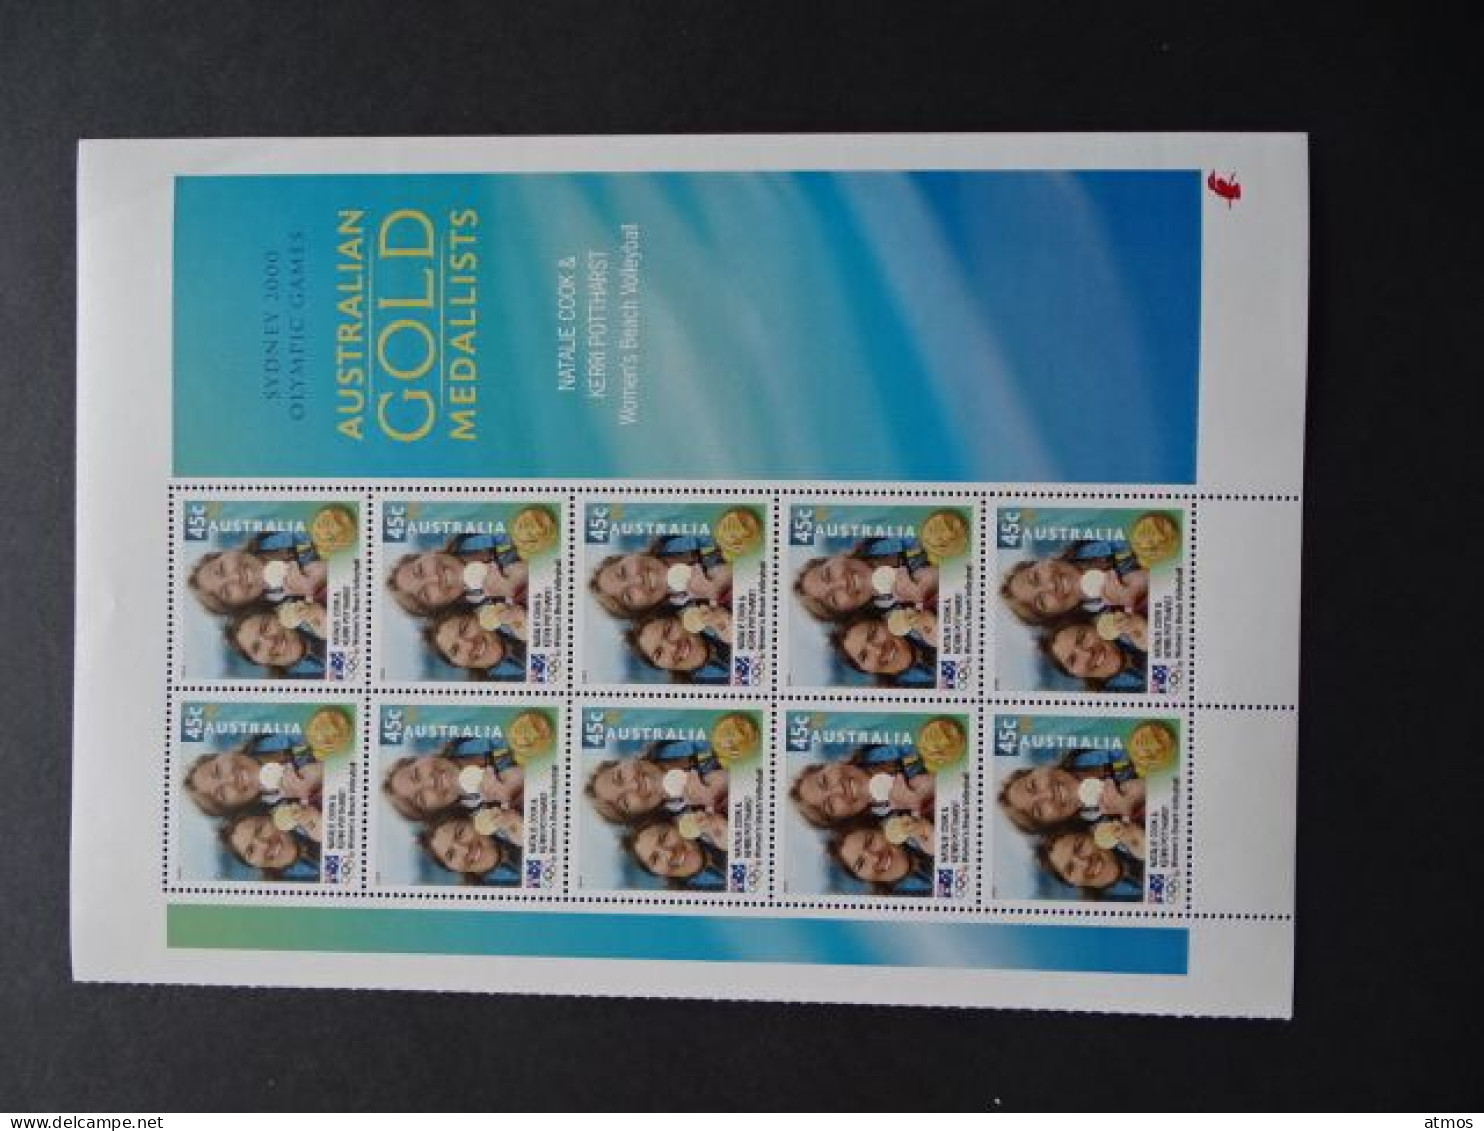 Australia MNH Michel Nr 1983 Sheet Of 10 From 2000 ACT - Neufs